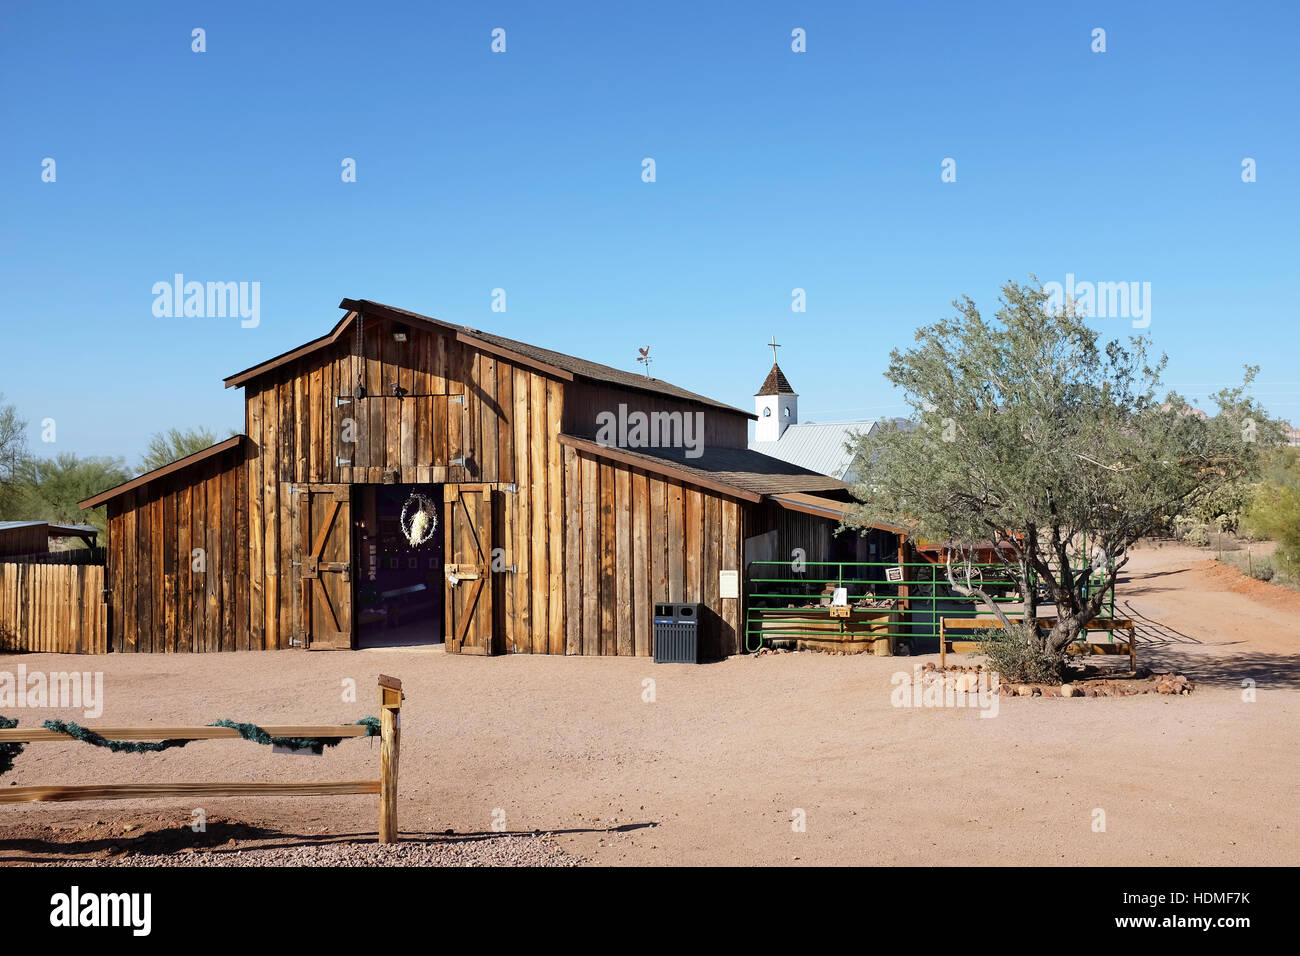 Apacheland Barn with the  Elvis Memorial Chapel in the background at the Superstition Mountain Museum in Apache Junction, Ariizona. Stock Photo